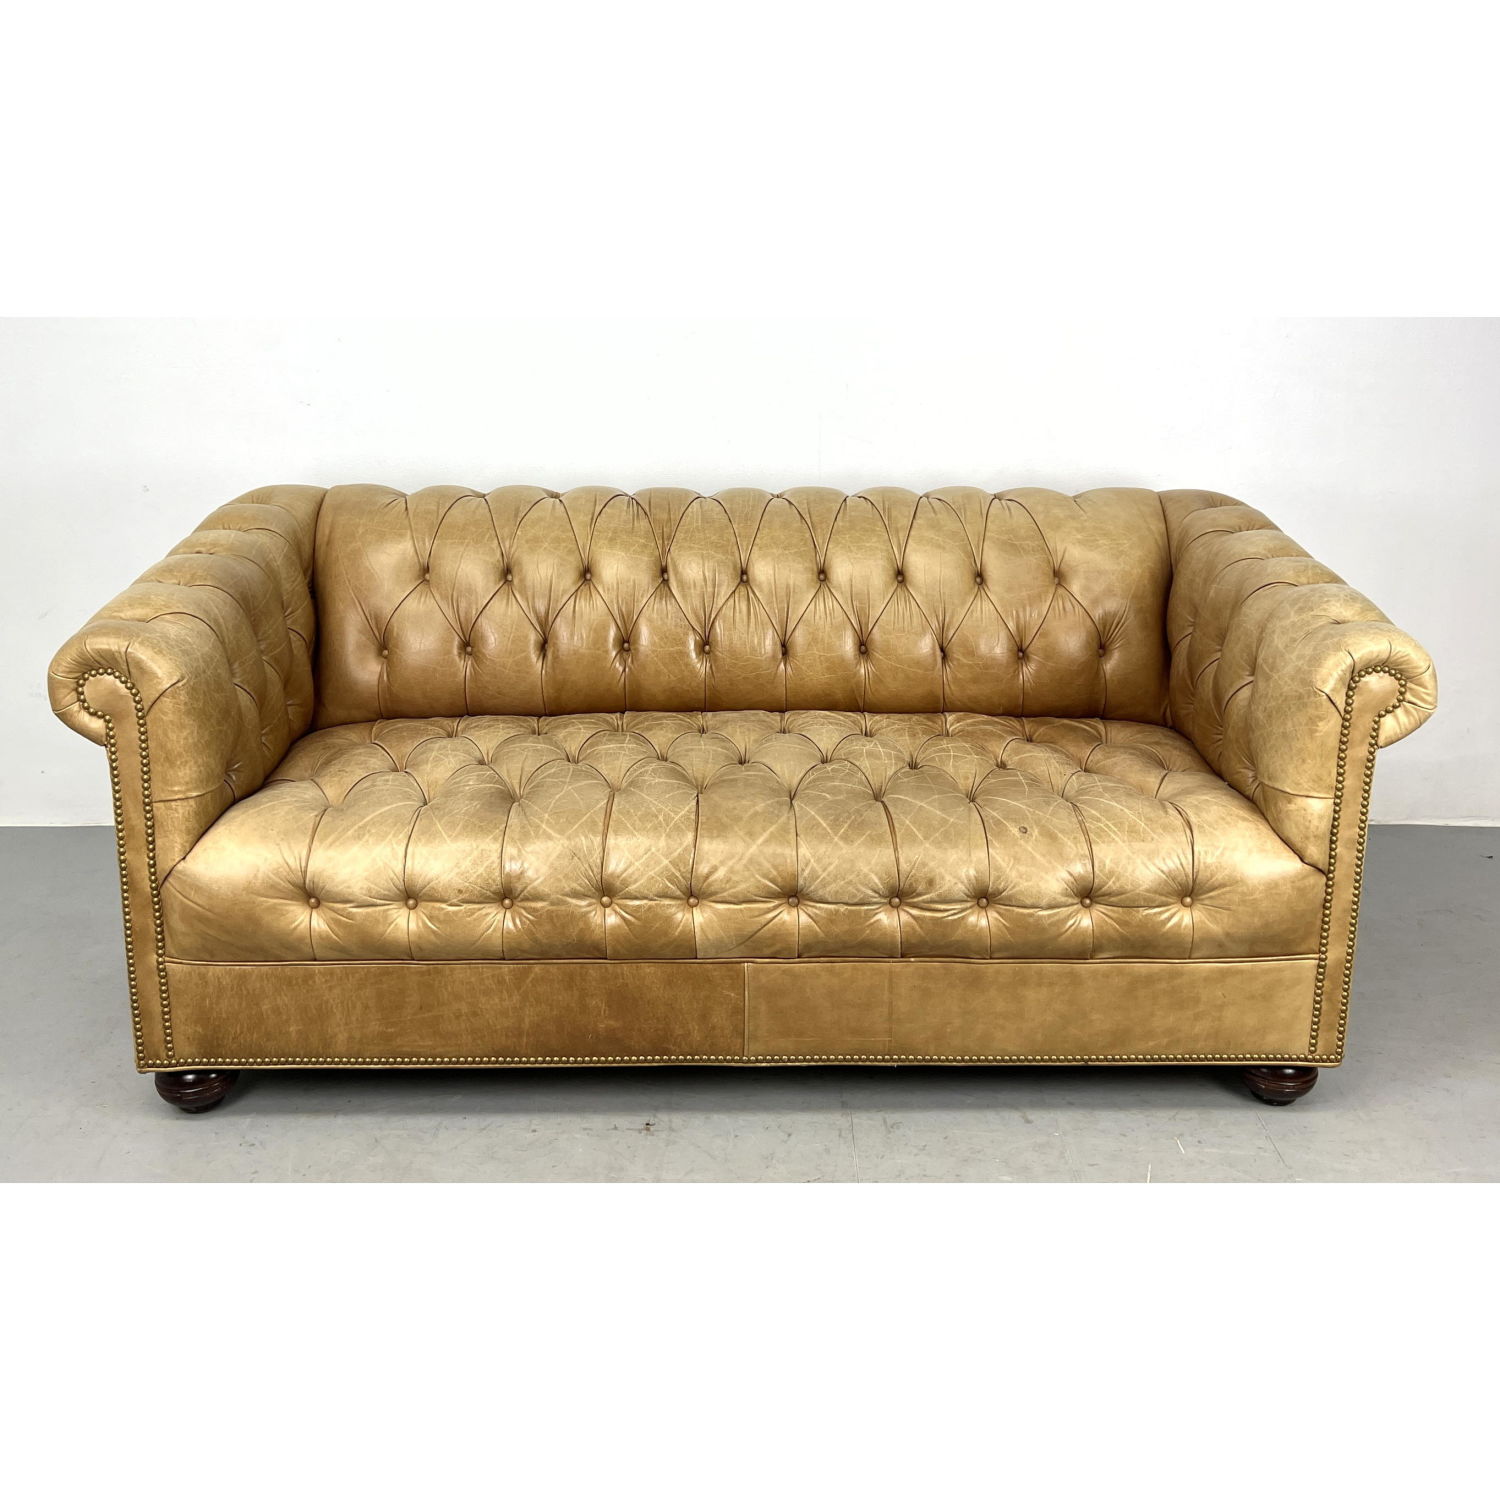 Vintage Leather Chesterfield Sofa 2ff0f6